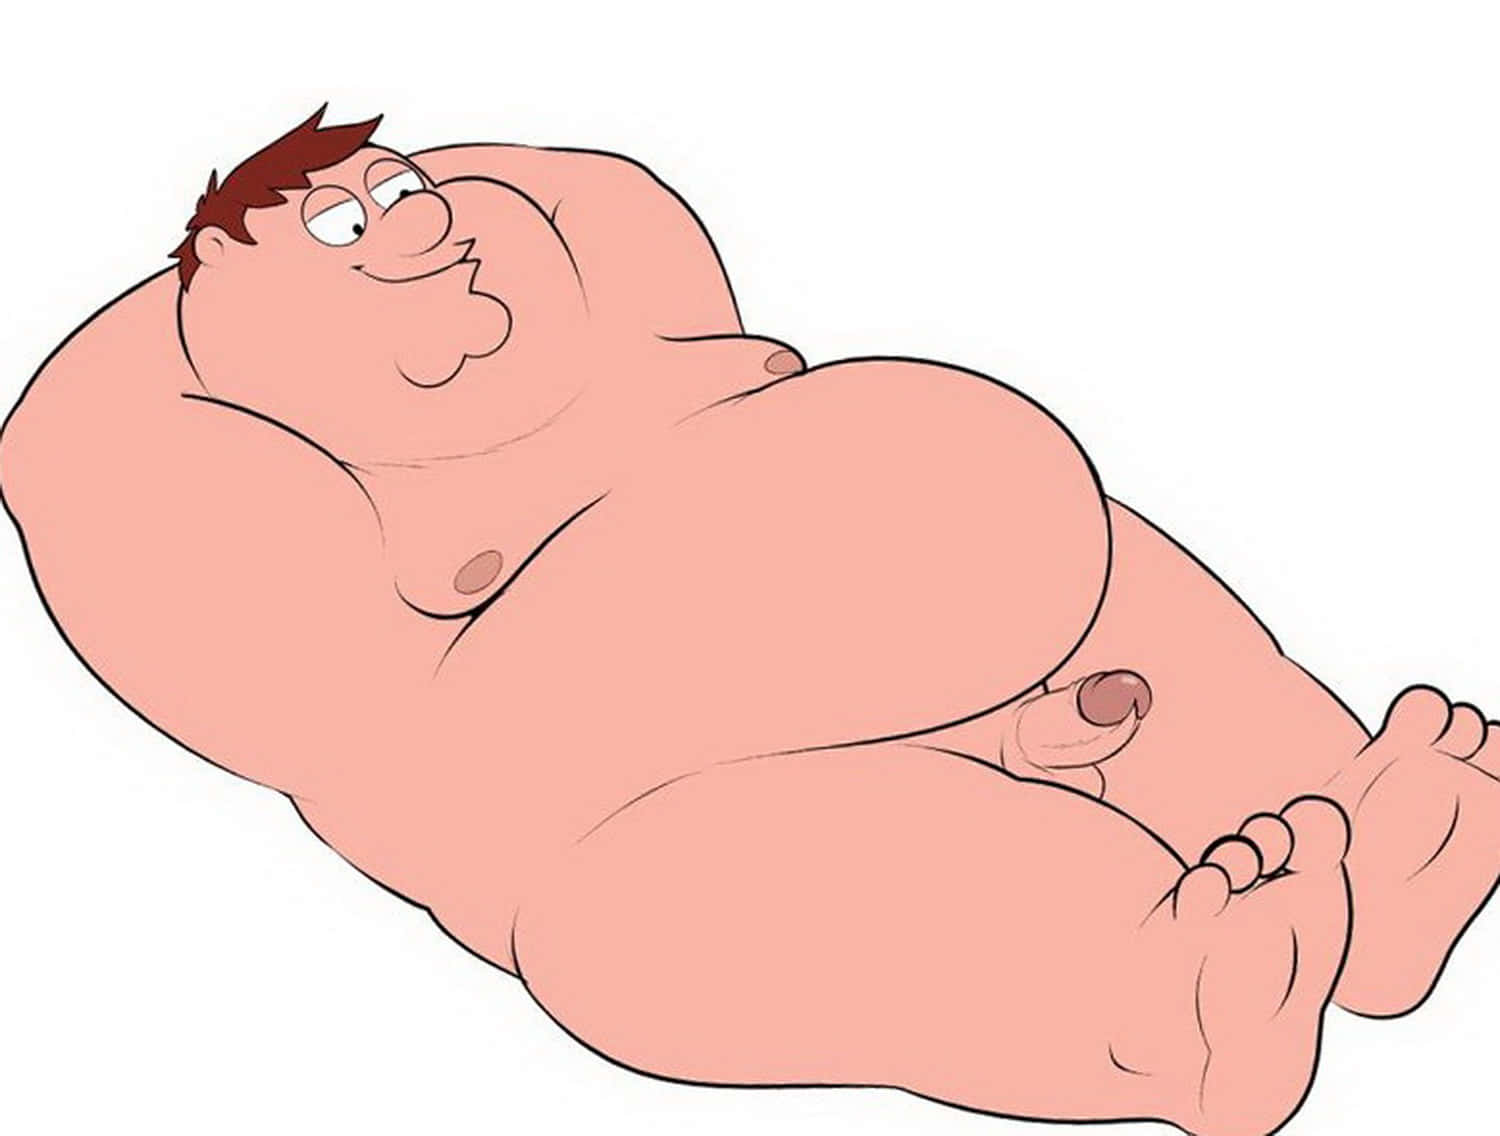 Peter Griffin Solo Penis.